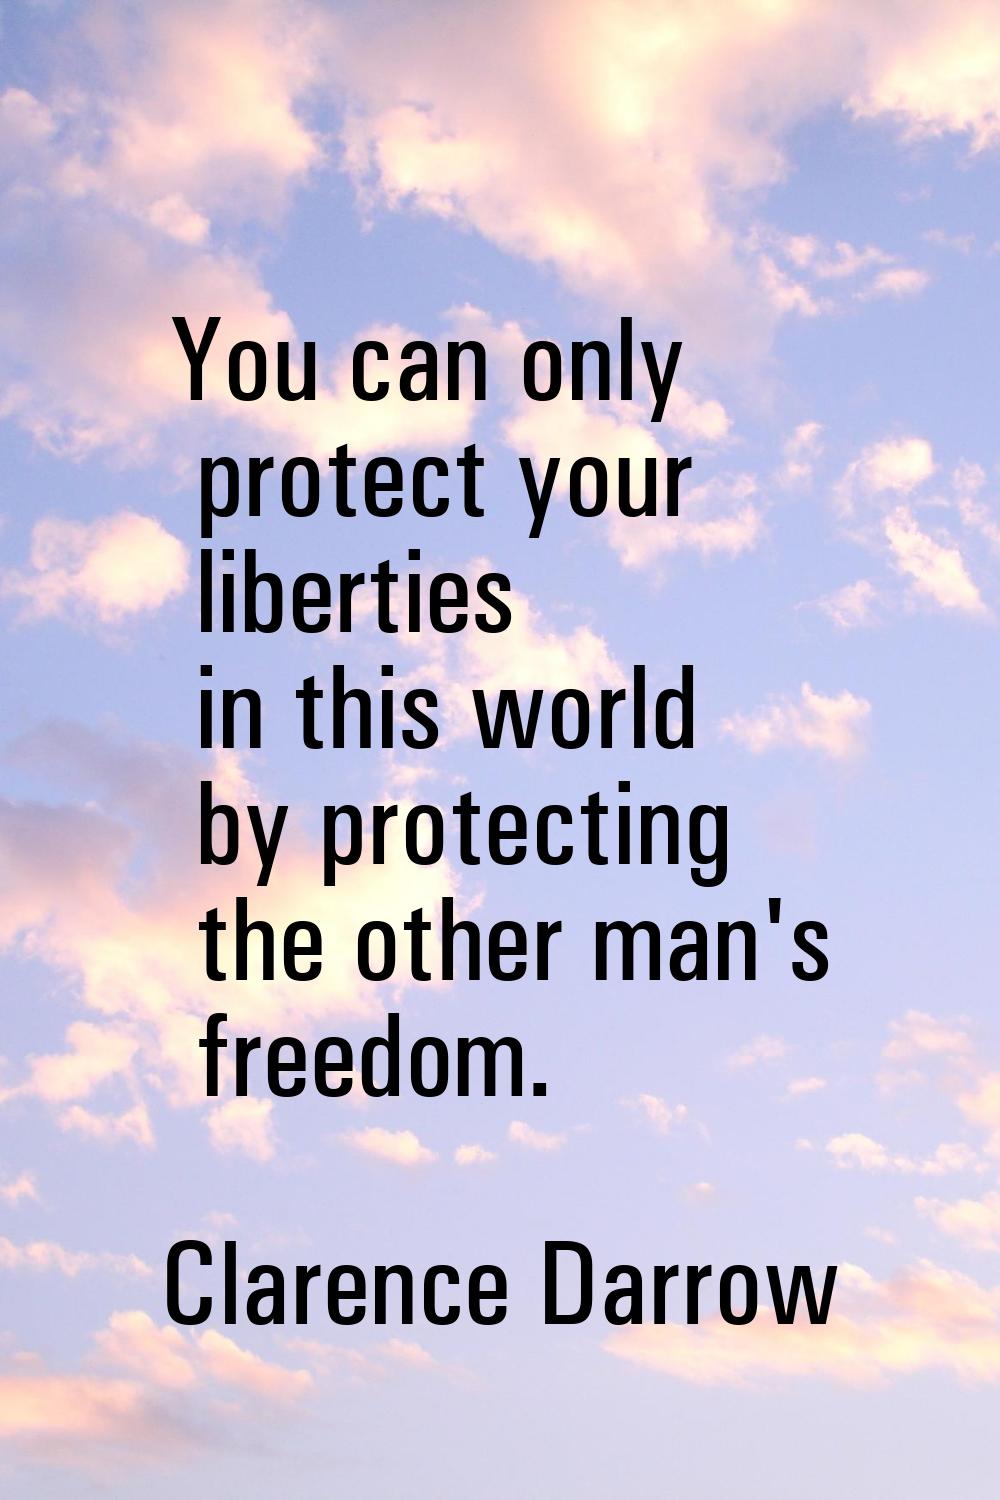 You can only protect your liberties in this world by protecting the other man's freedom.